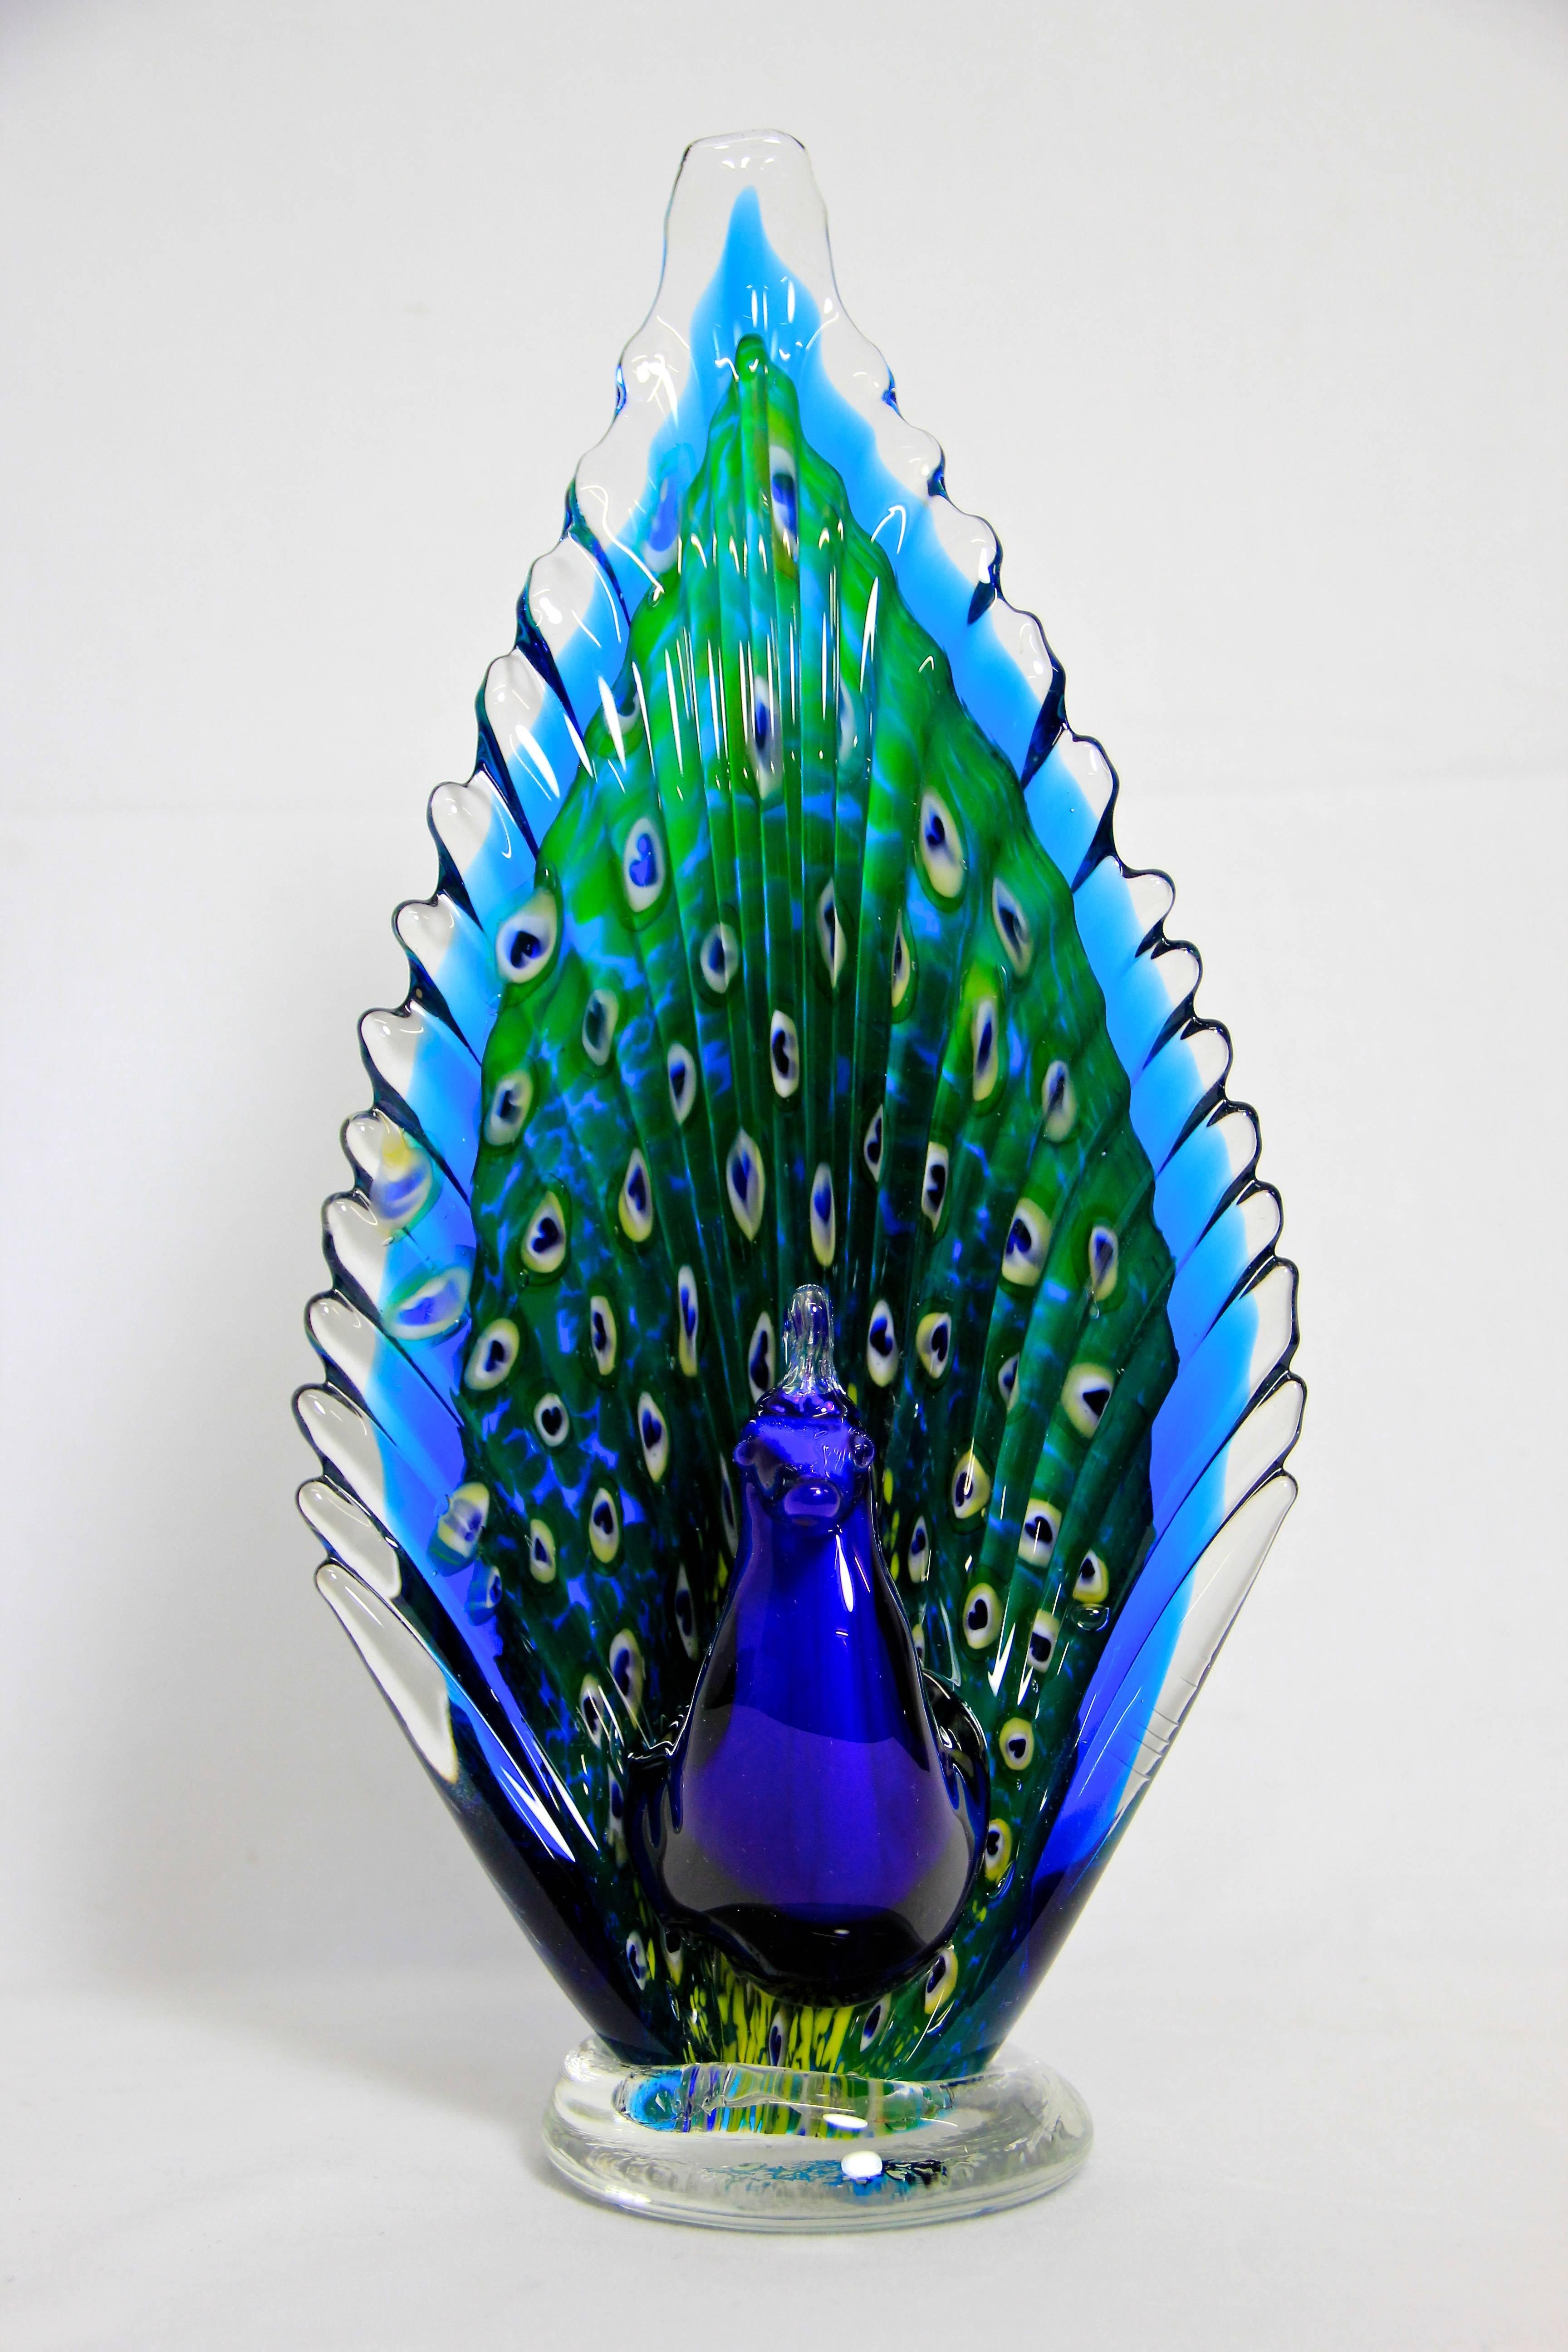 In this selection we are offering you eight properly selected Murano Glass Art pieces in absolute excellent quality. Every collector knows we are talking about!
This amazing Murano Glass Peacock is the first piece of our rare Murano Glass